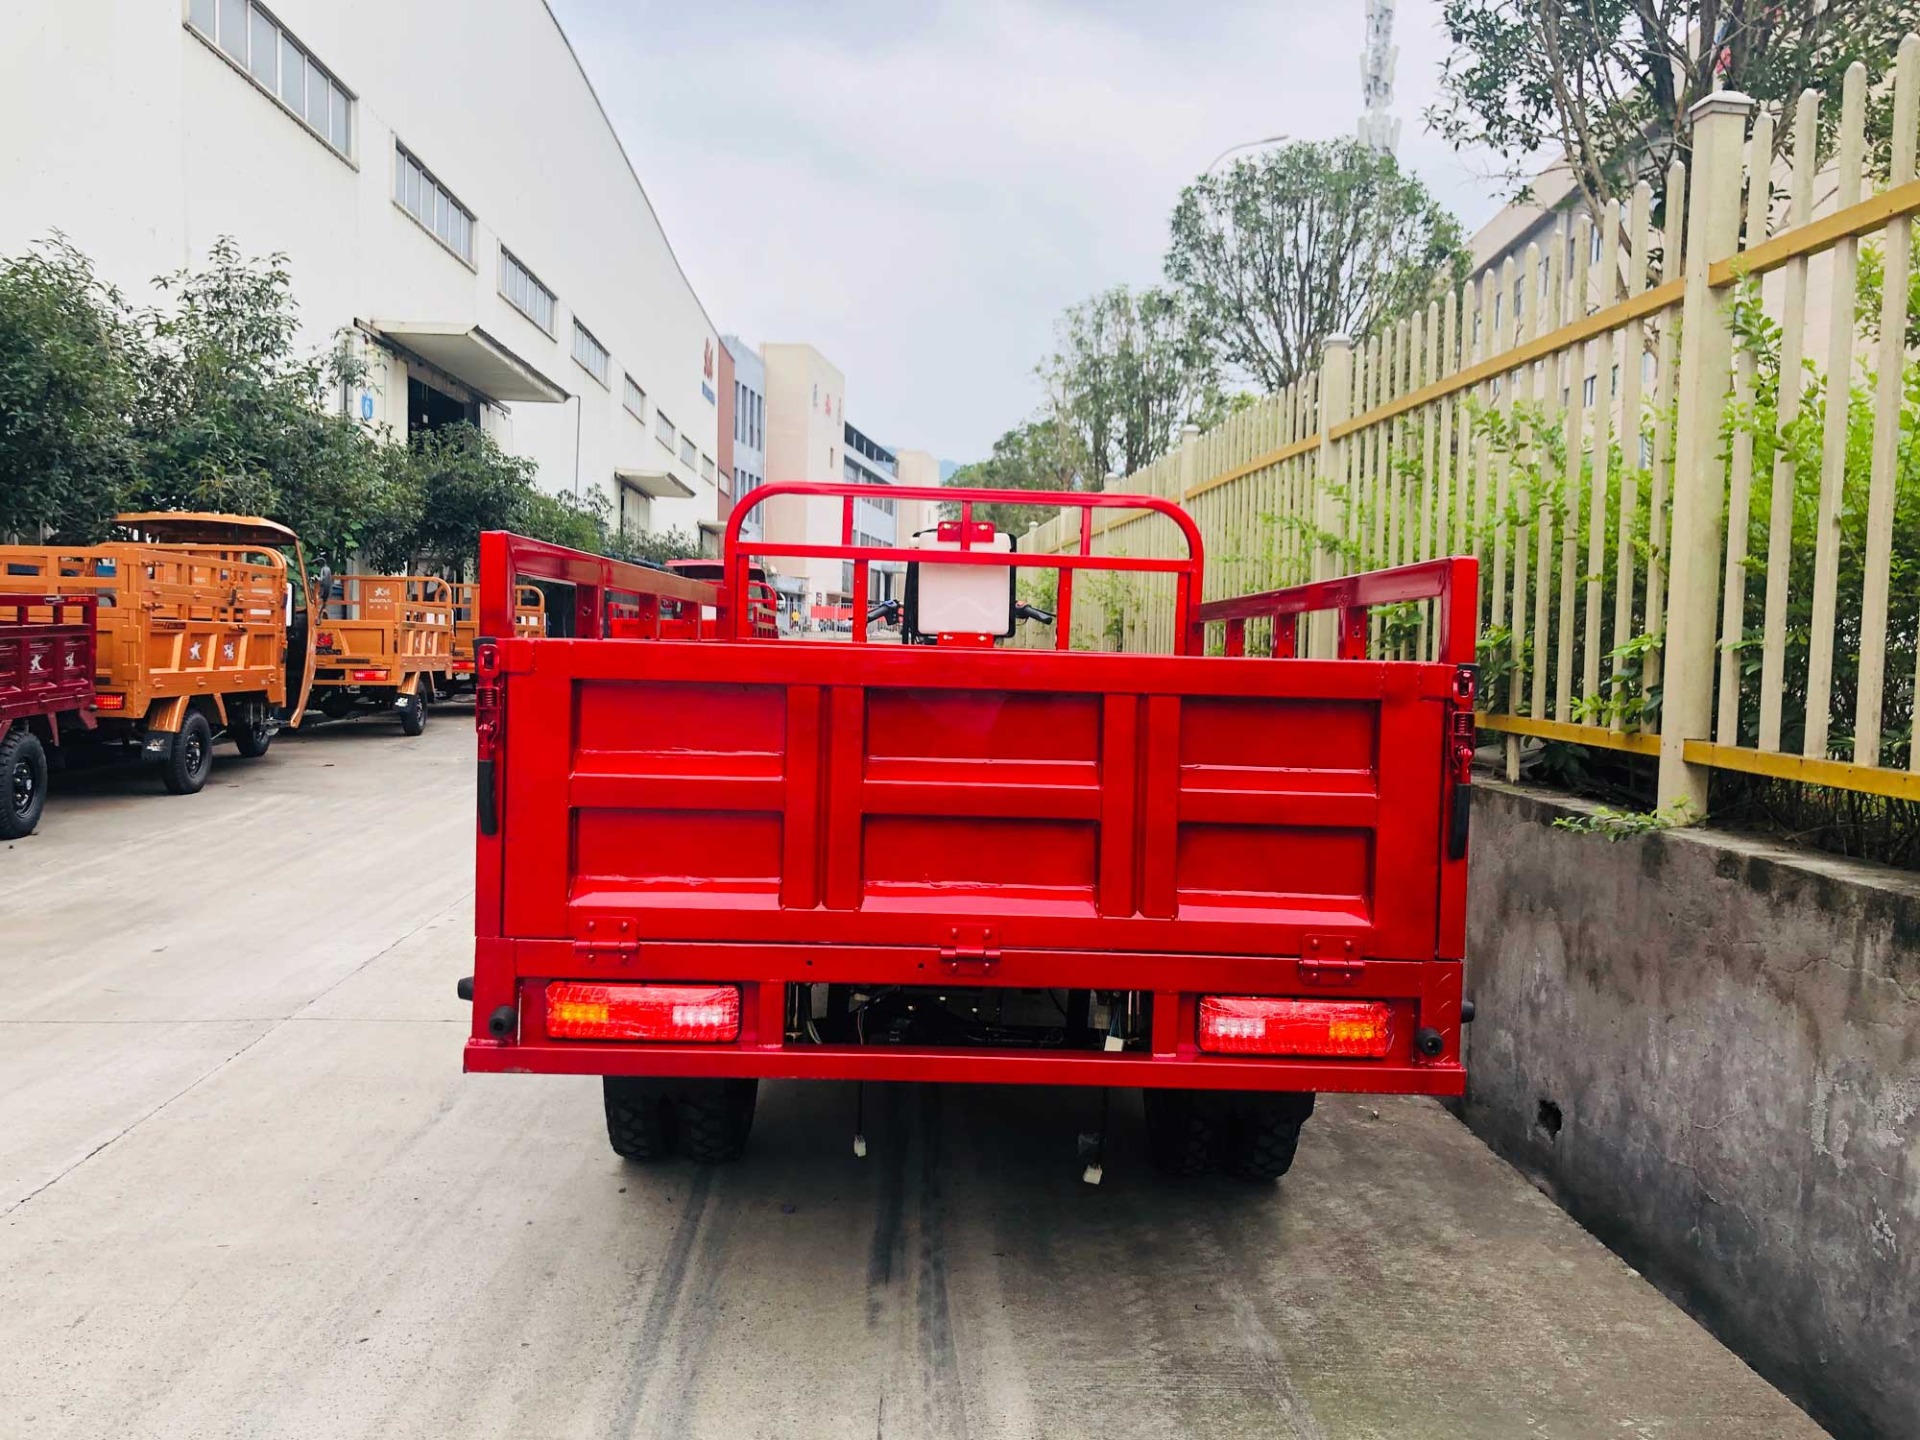 Chinese factory wholesale adults farm  200cc tricycle engine heavy loading 1 ton cargo box gaso